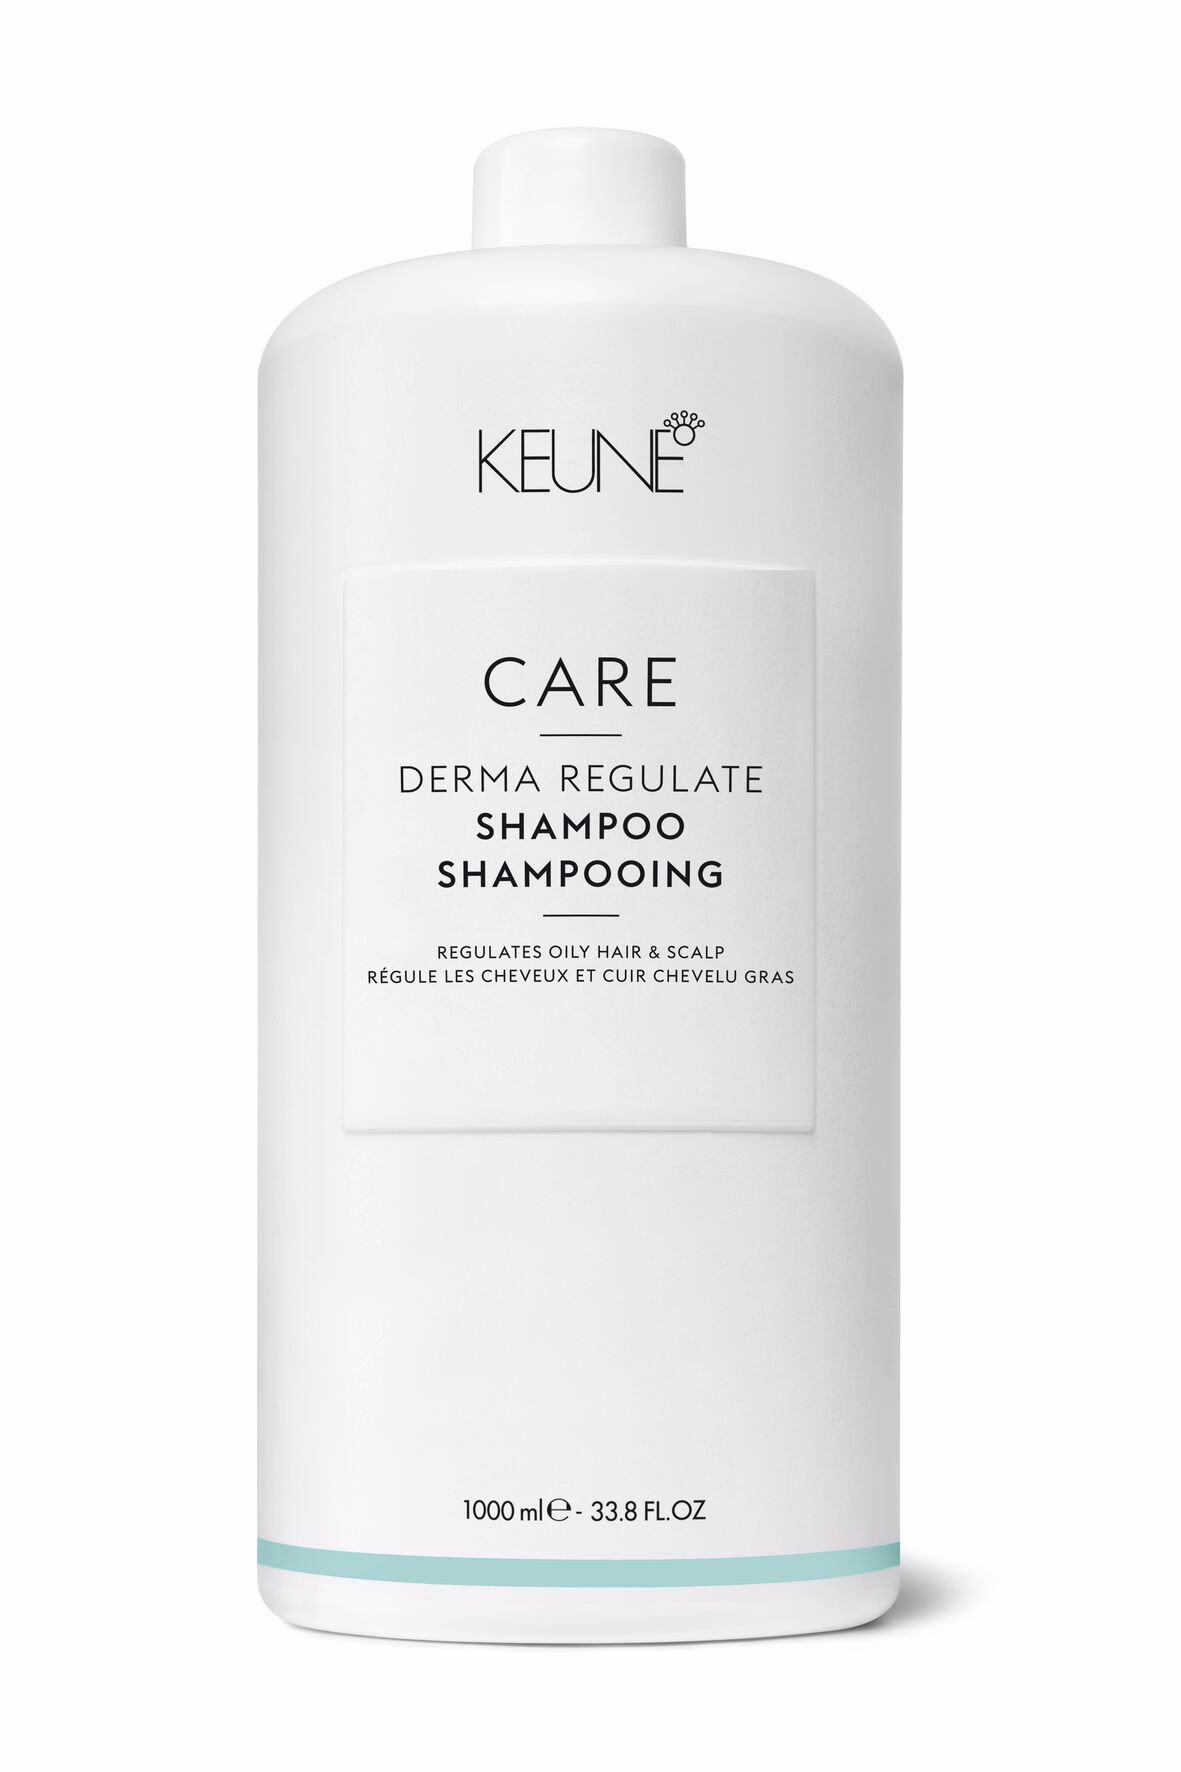 Our Derma Regulate Shampoo for oily hair is effective in hair cleansing. Silicone-free, soothes the scalp, provides a refreshing sensation, smooth hair, and natural balance. Available now on keune.ch!